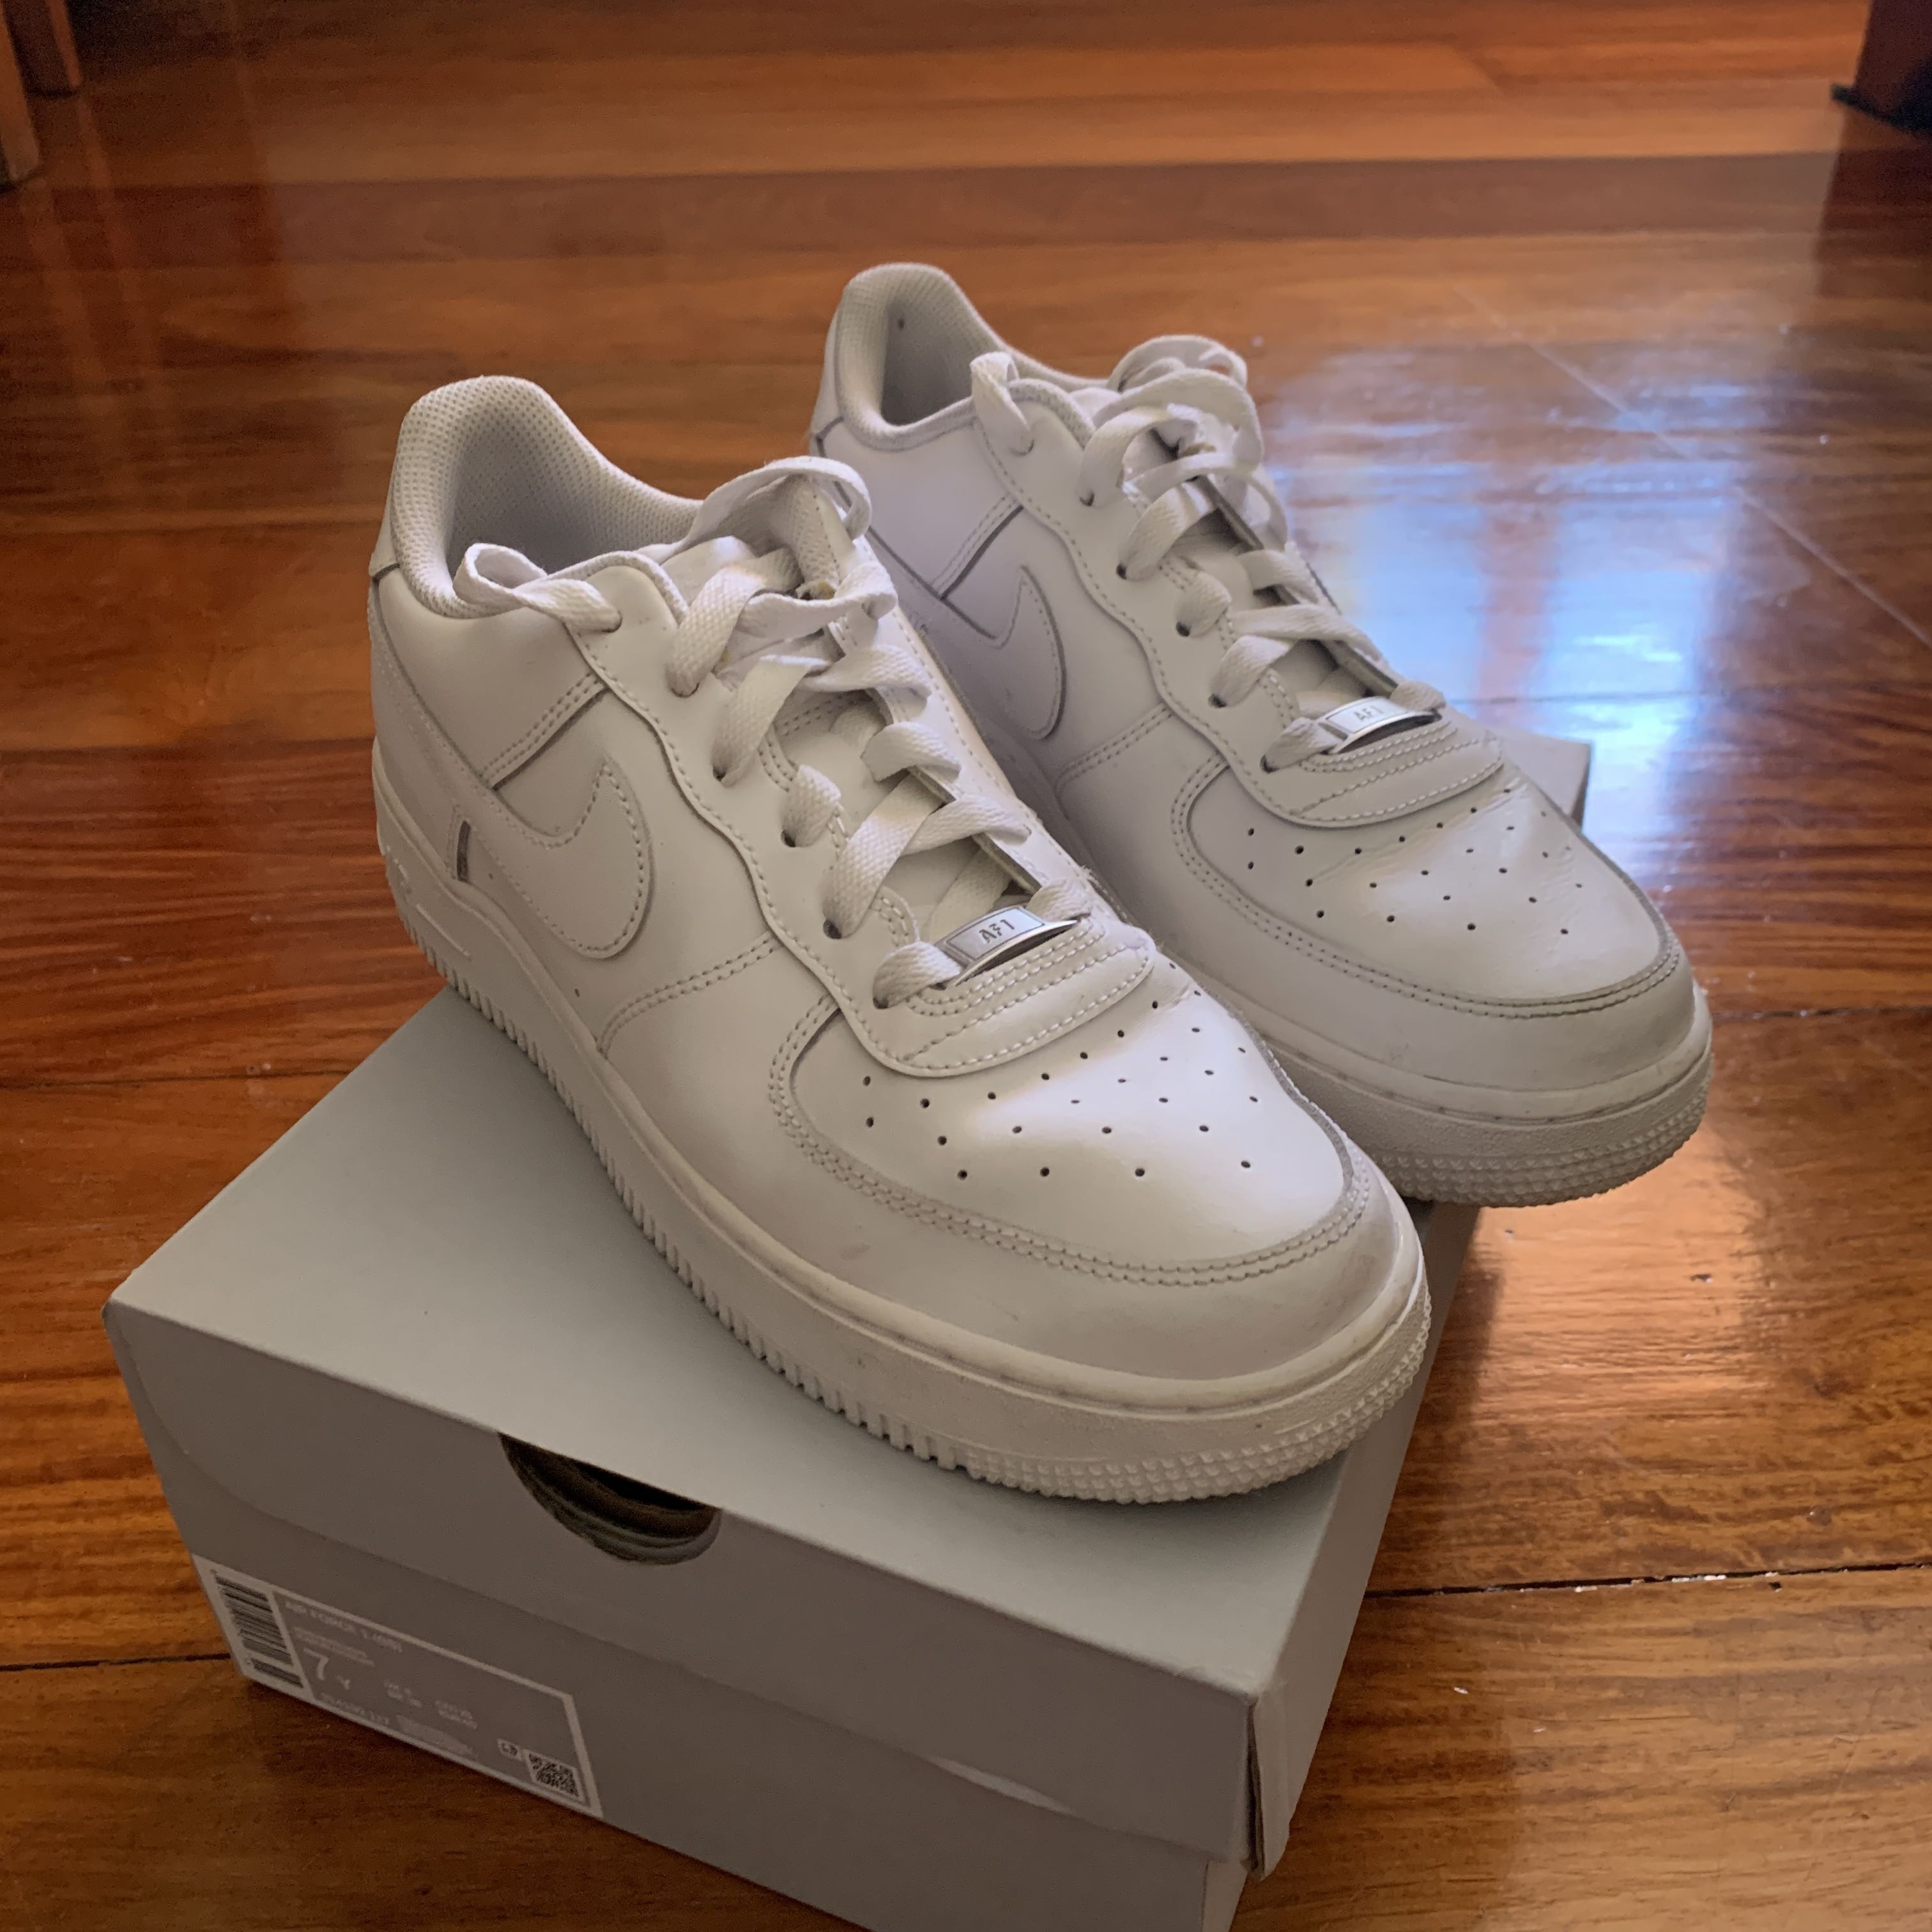 white air force one size 7